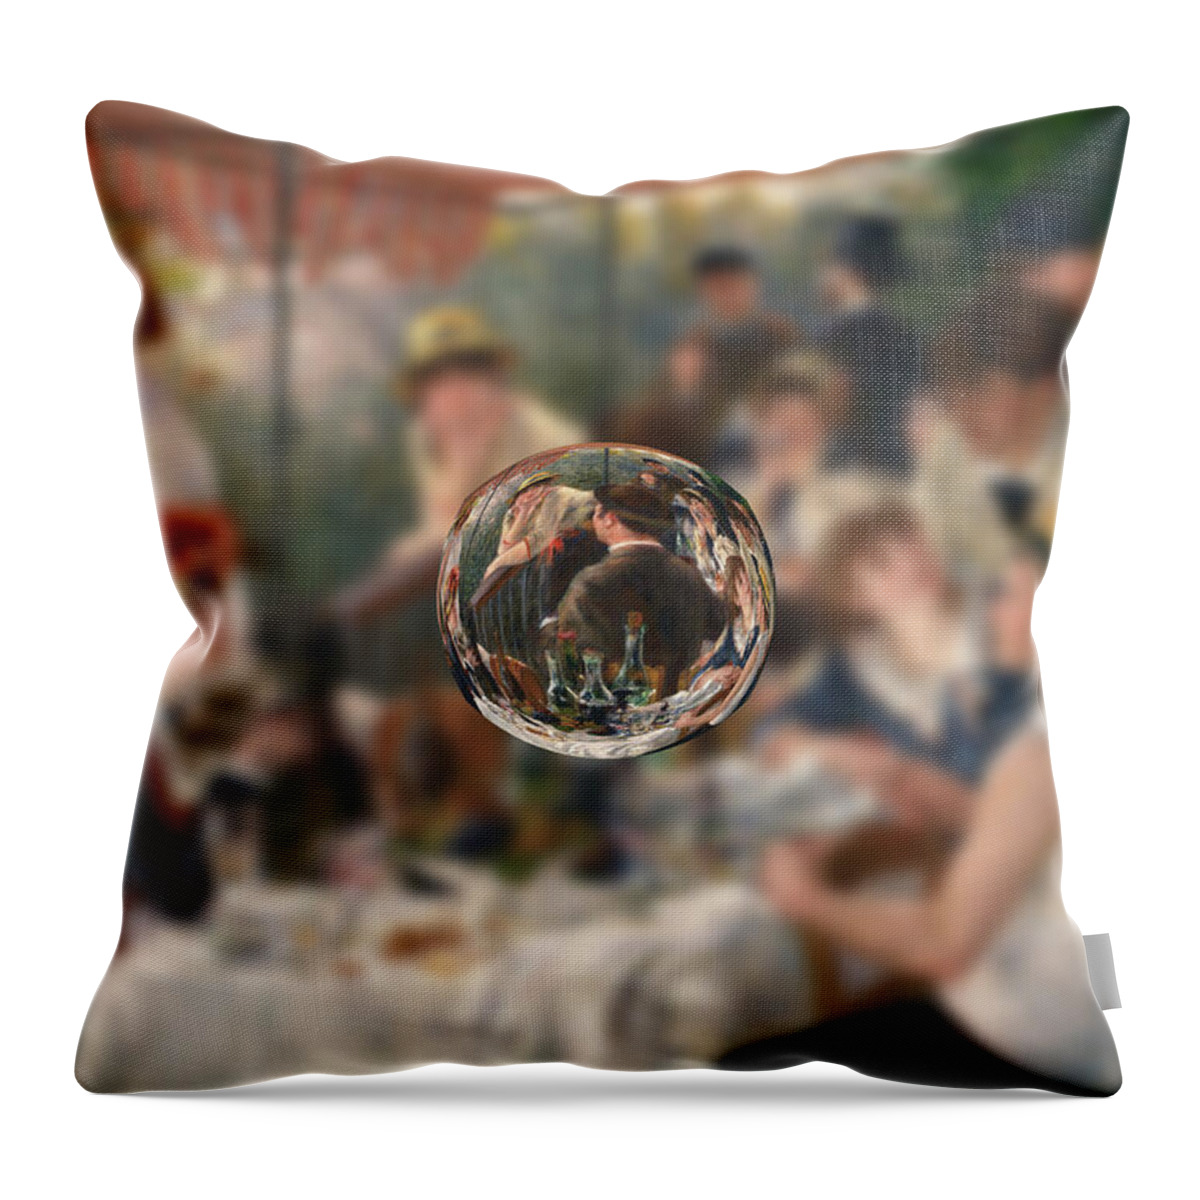 Abstract In The Living Room Throw Pillow featuring the digital art Sphere 4 Renoir by David Bridburg